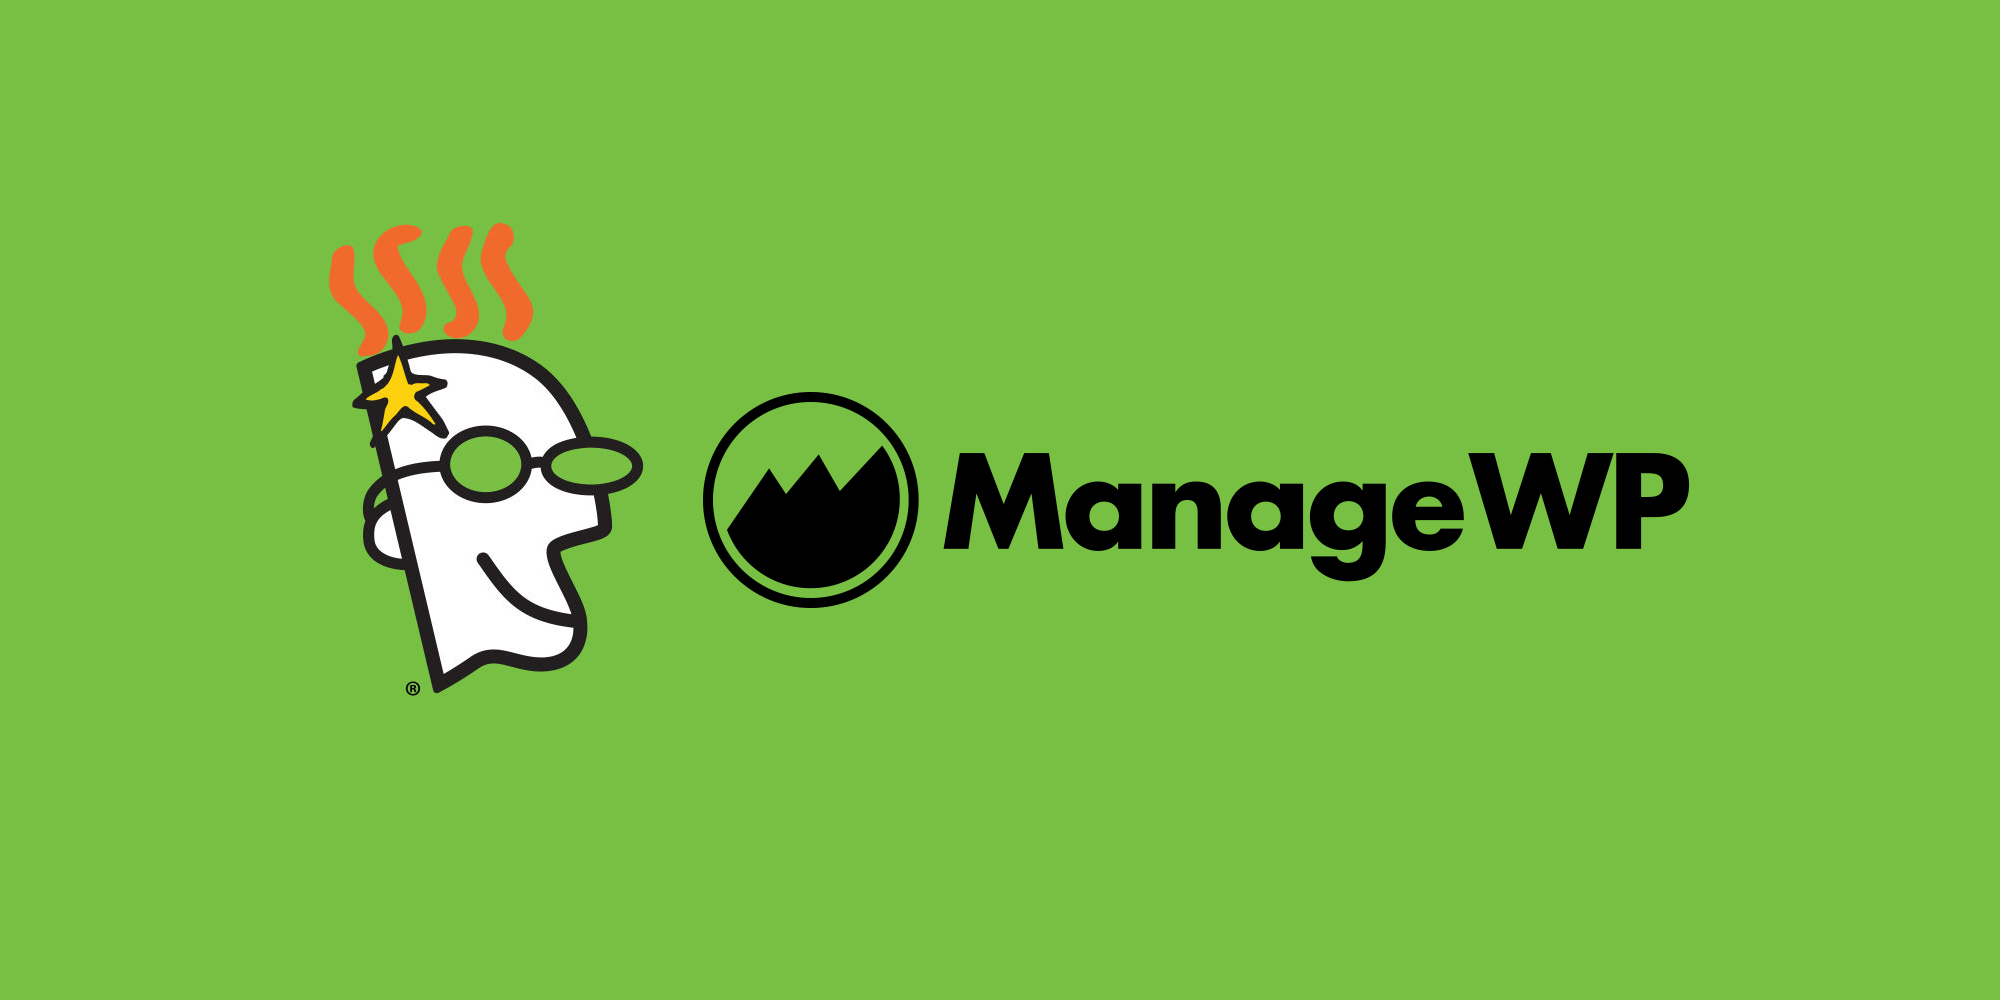 GoDaddy has acquired ManageWP